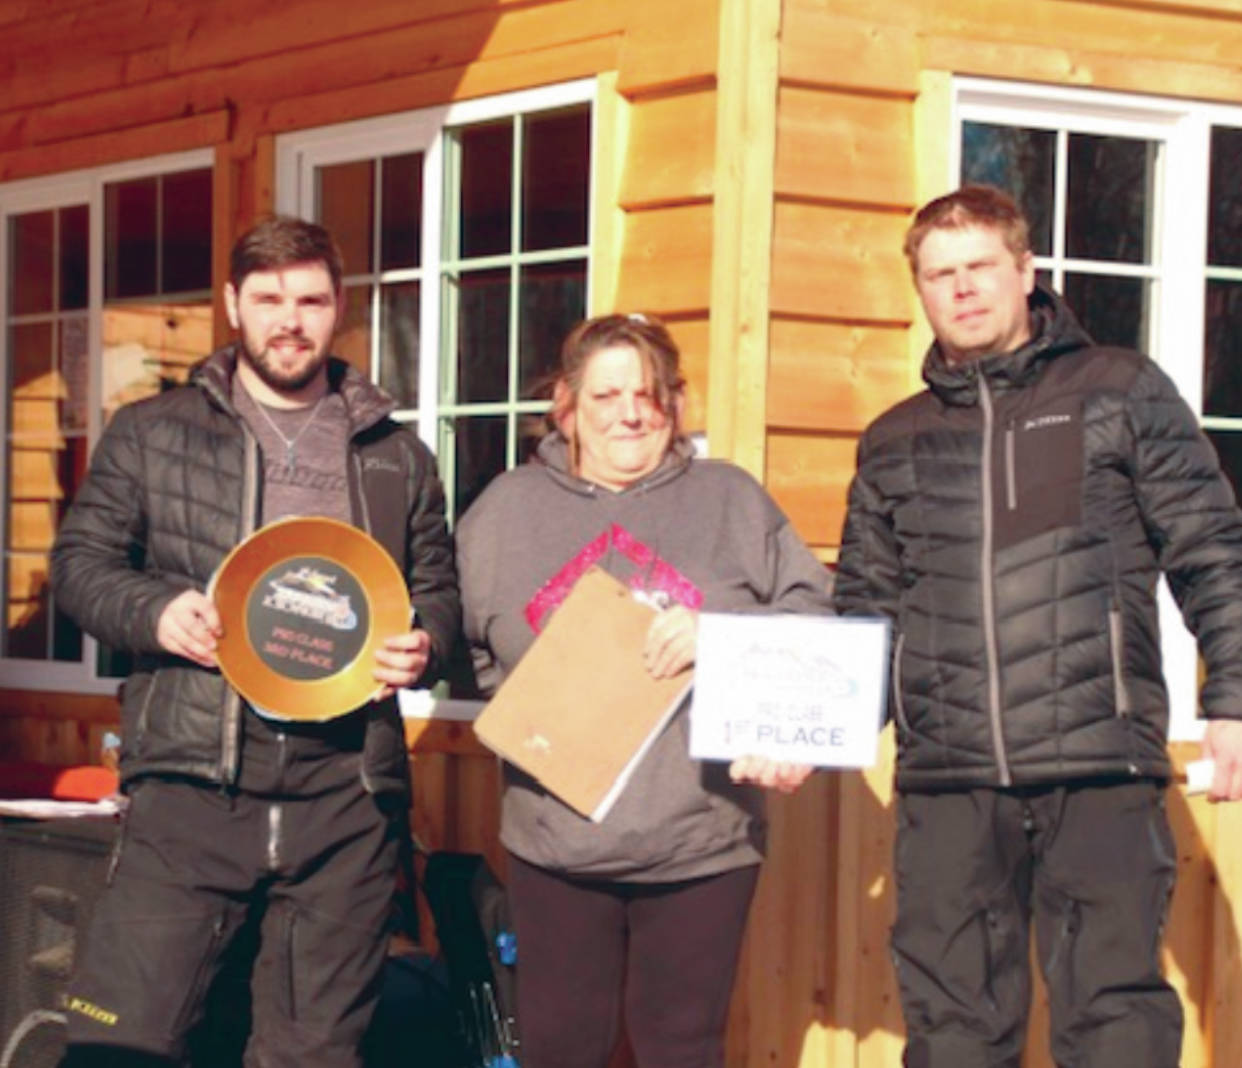 Soldotna’s Travis Temple and Chad Moore accept awards from Cindi Herman of Skwentna Roadhouse after the 5th Annual Skwentna XC Snowmachine Race on Saturday, March 27, 2021. (Photo provided)